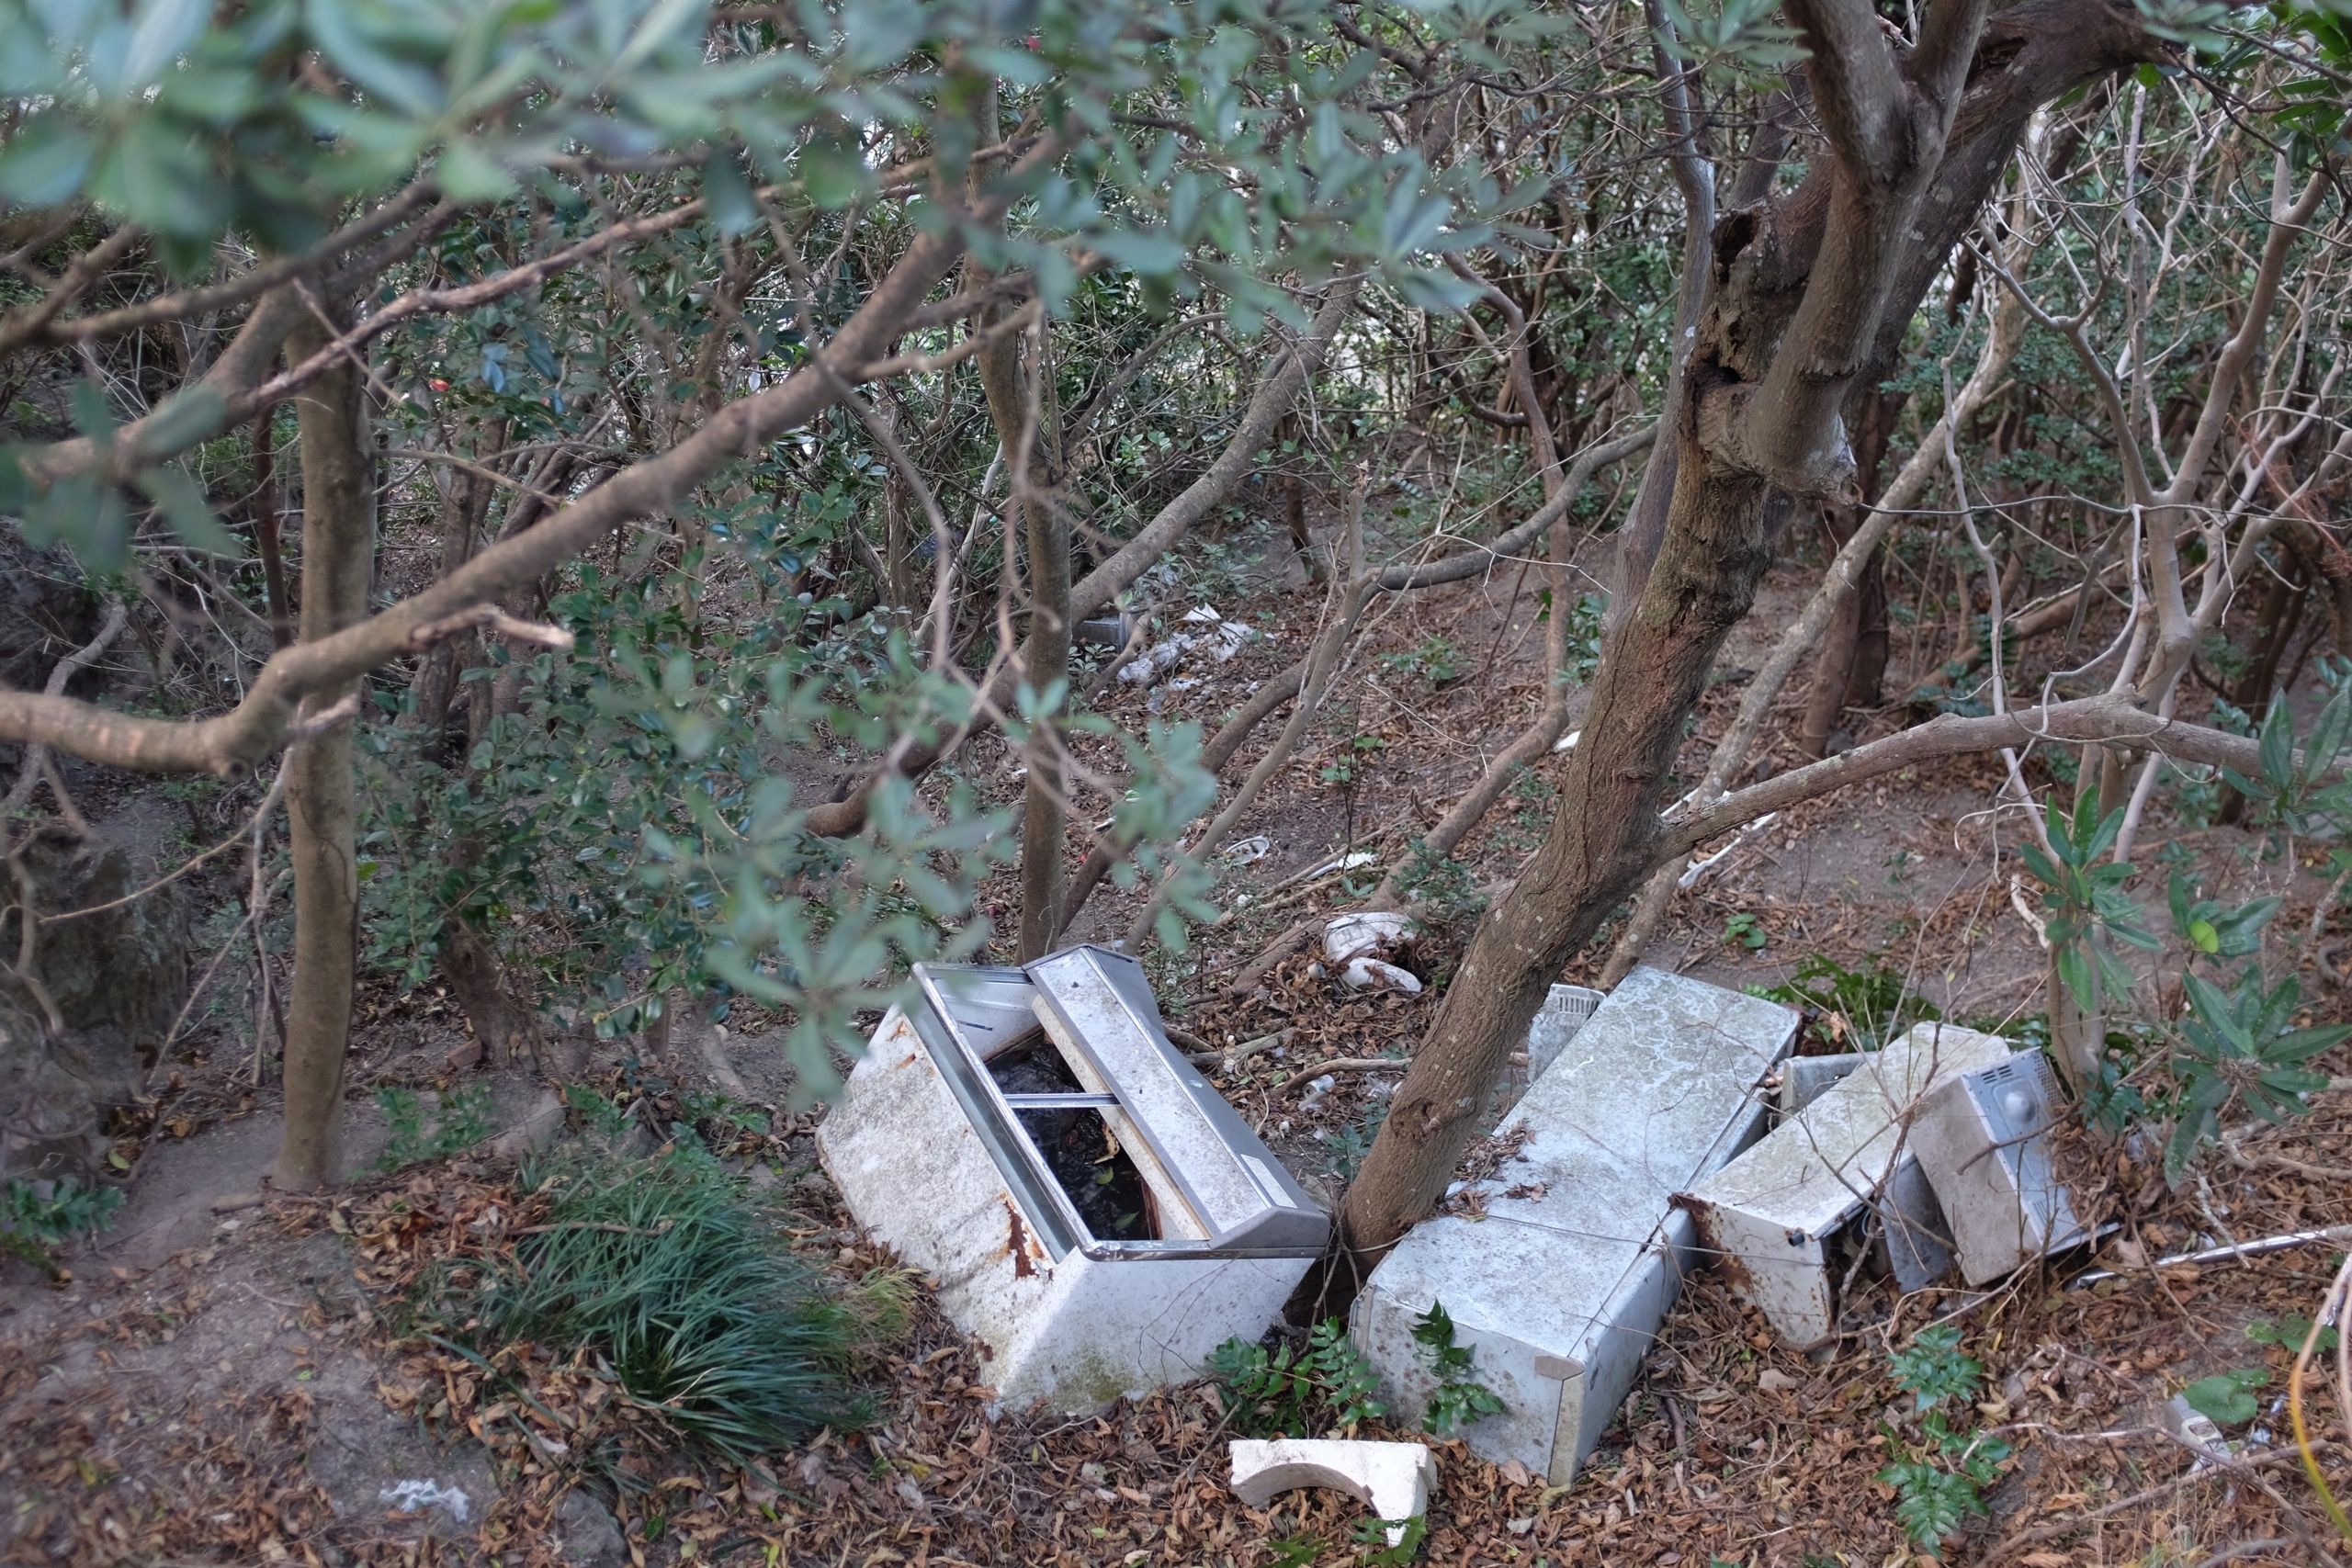 Discarded appliances litter the undergrowth.